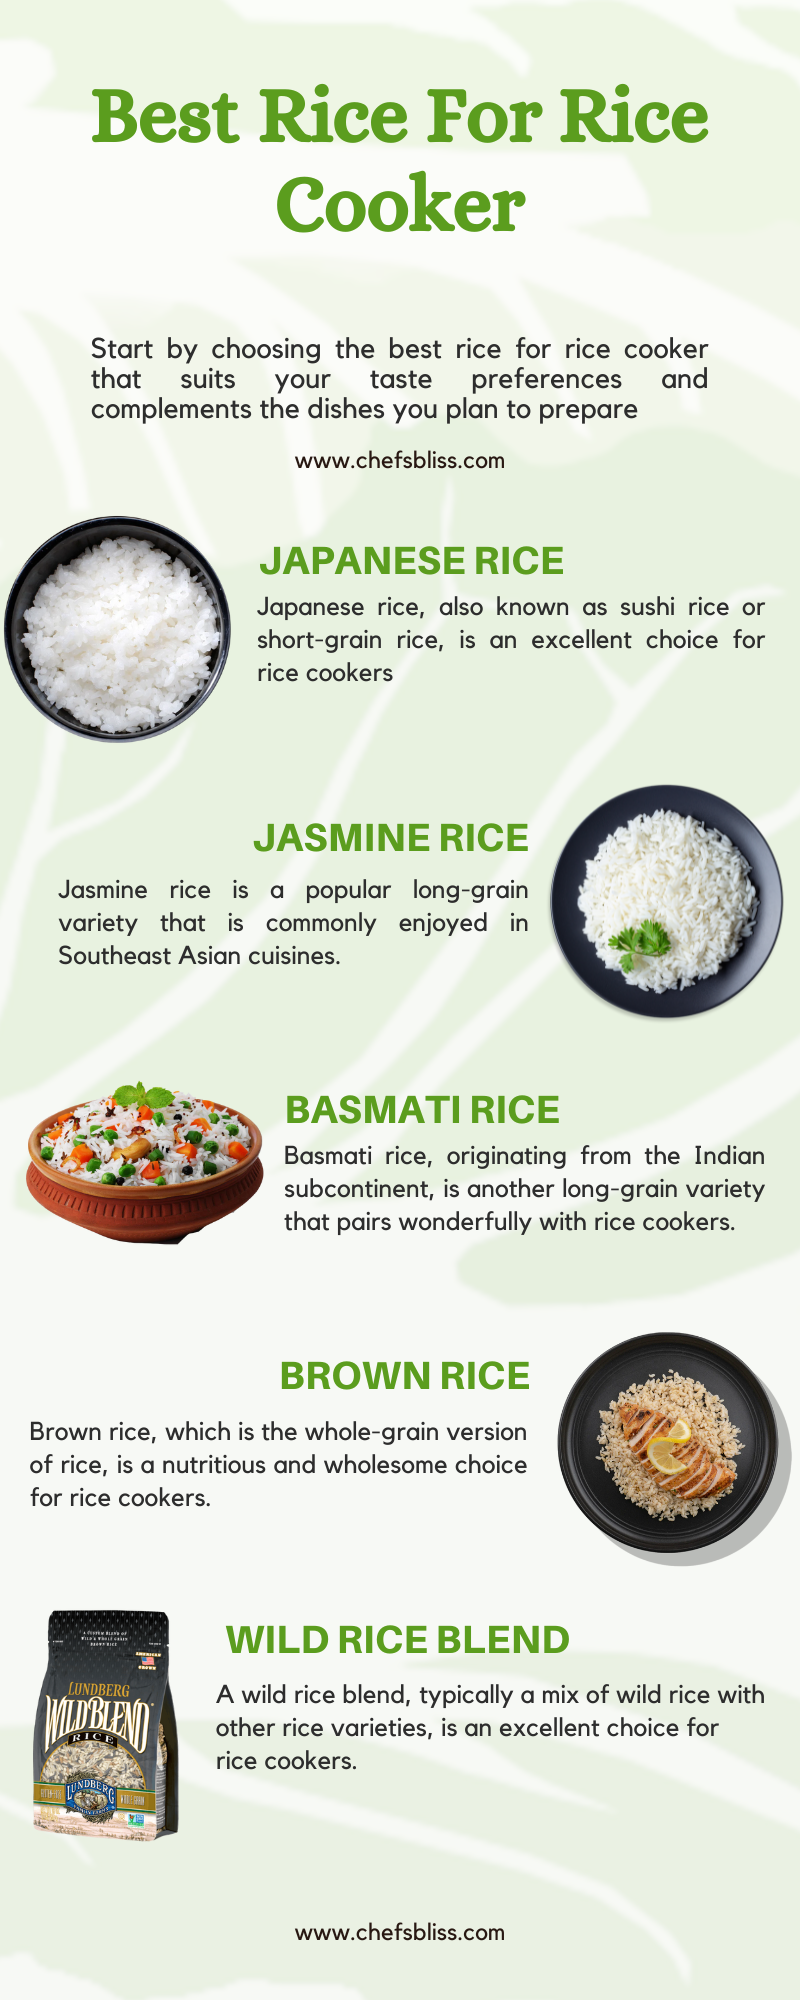 Best Rice For Rice Cooker